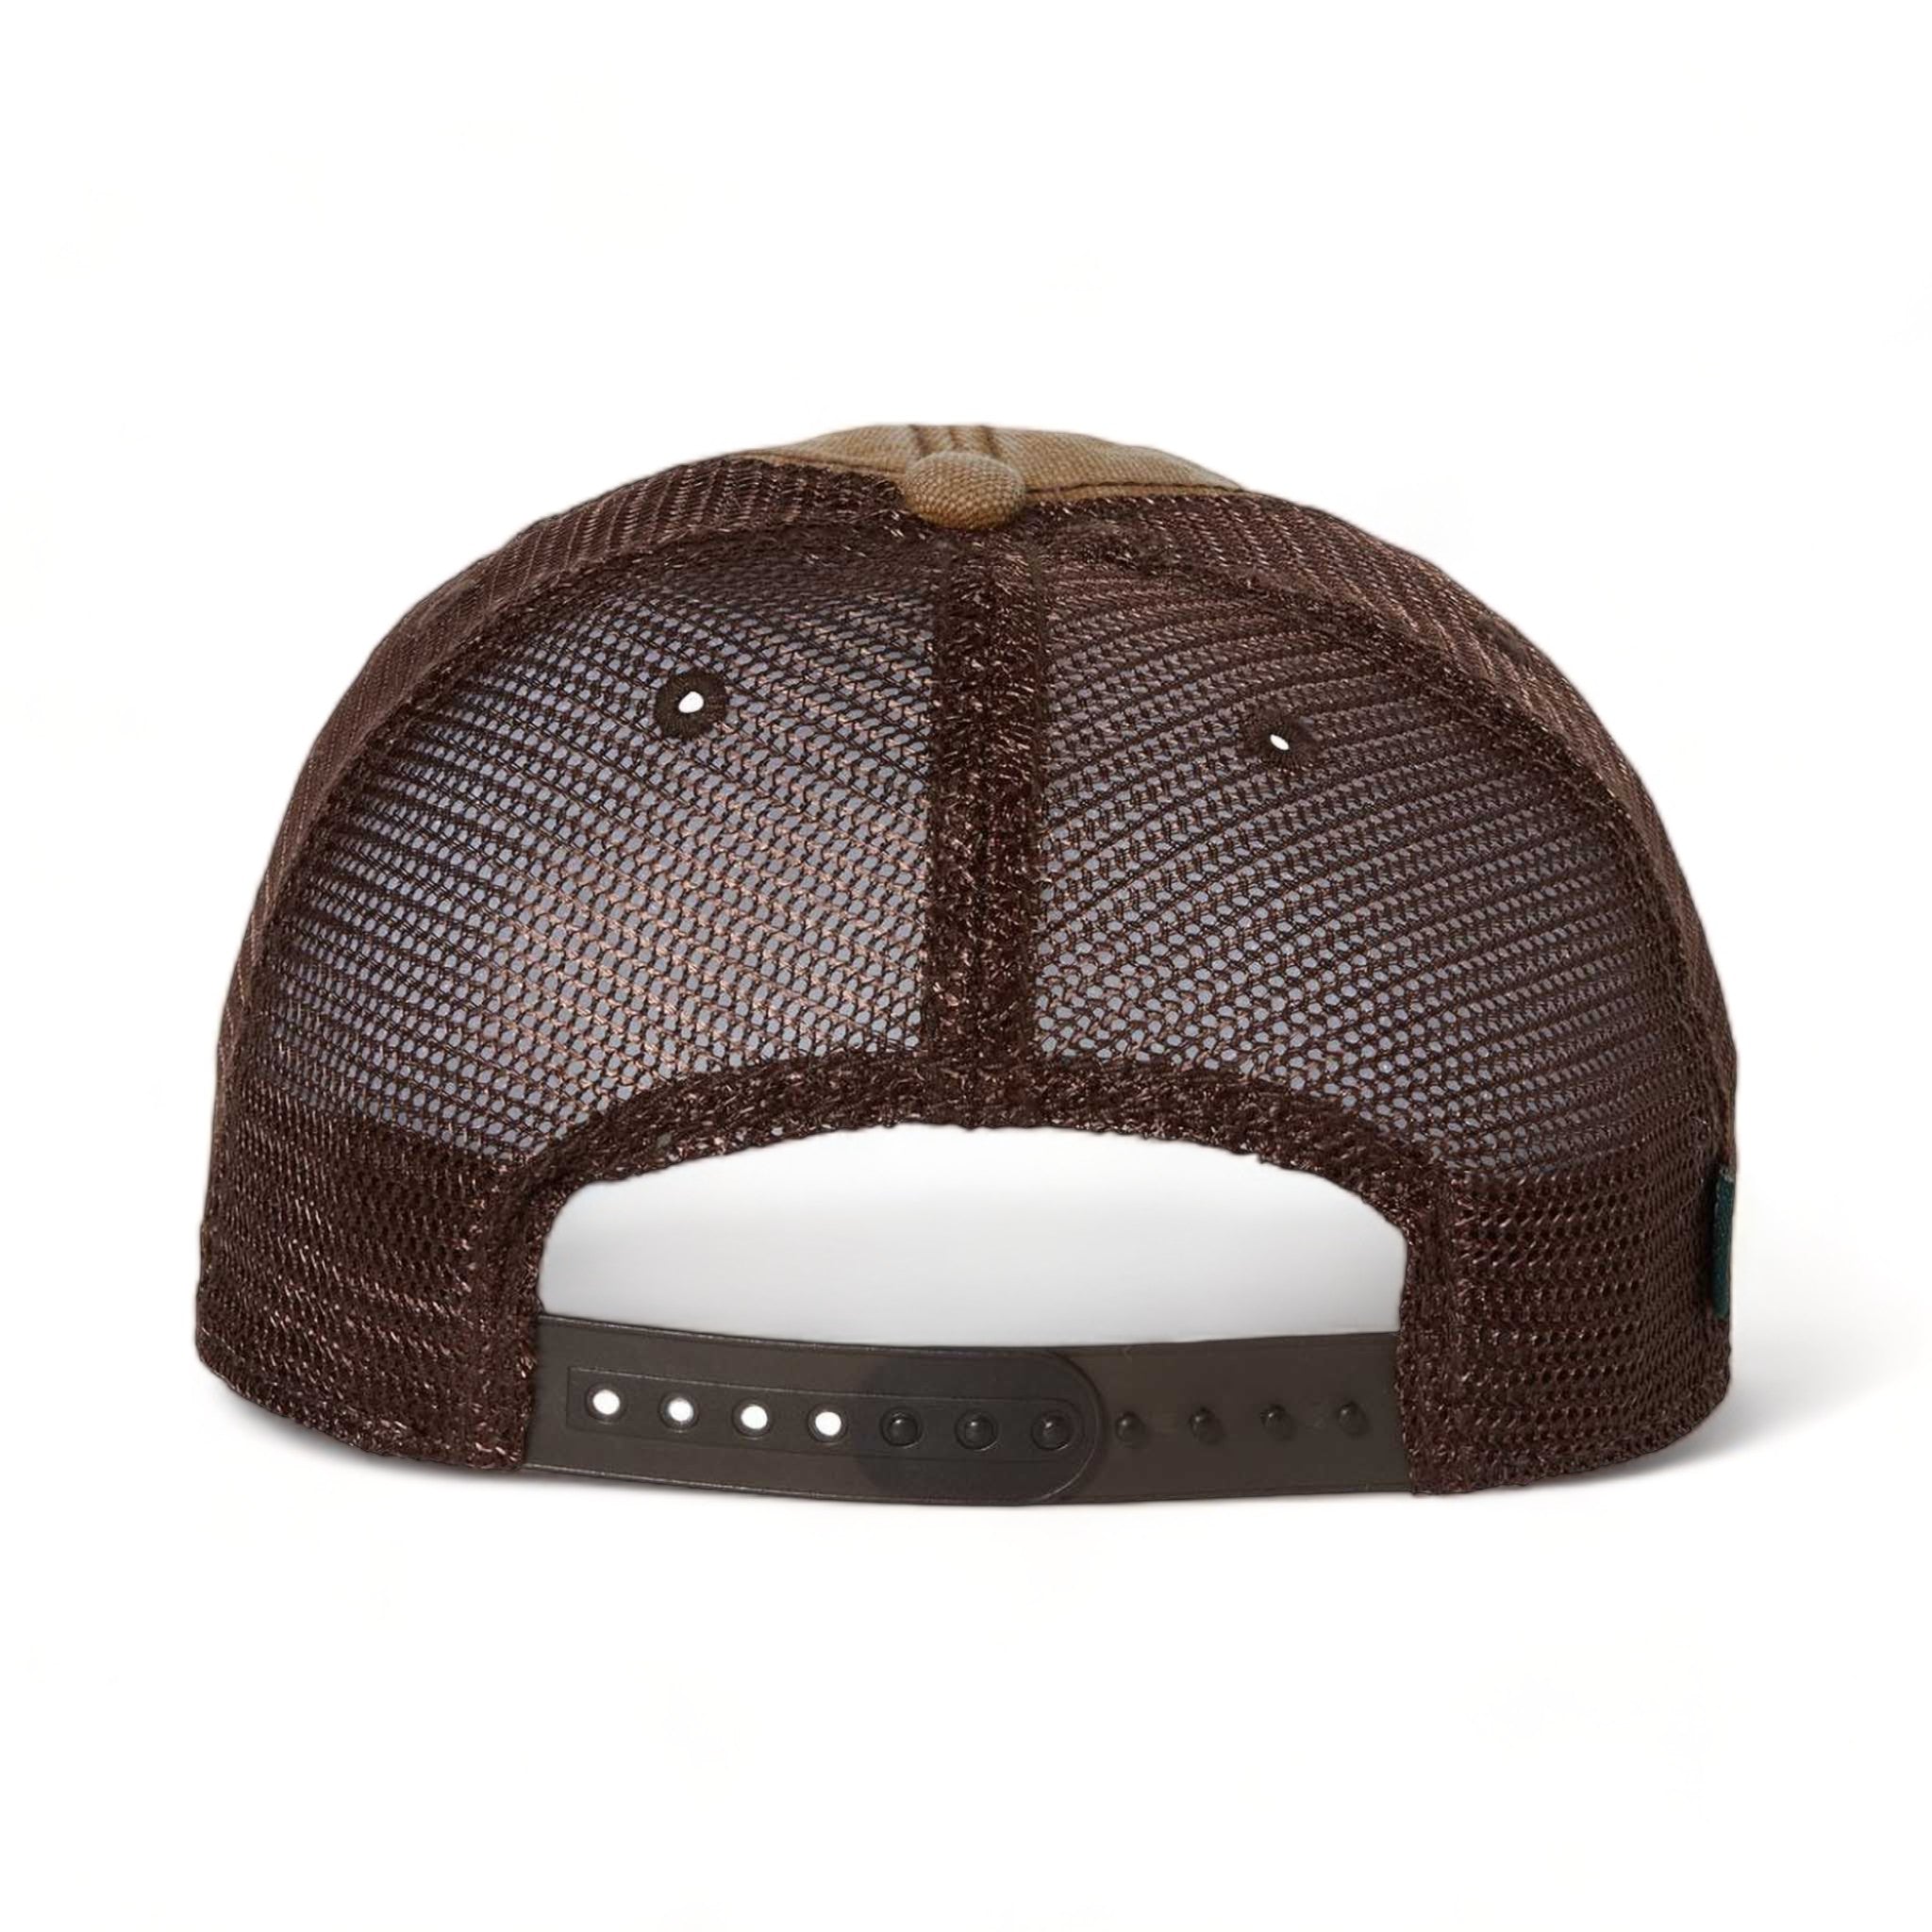 Back view of LEGACY DTA custom hat in camel and brown